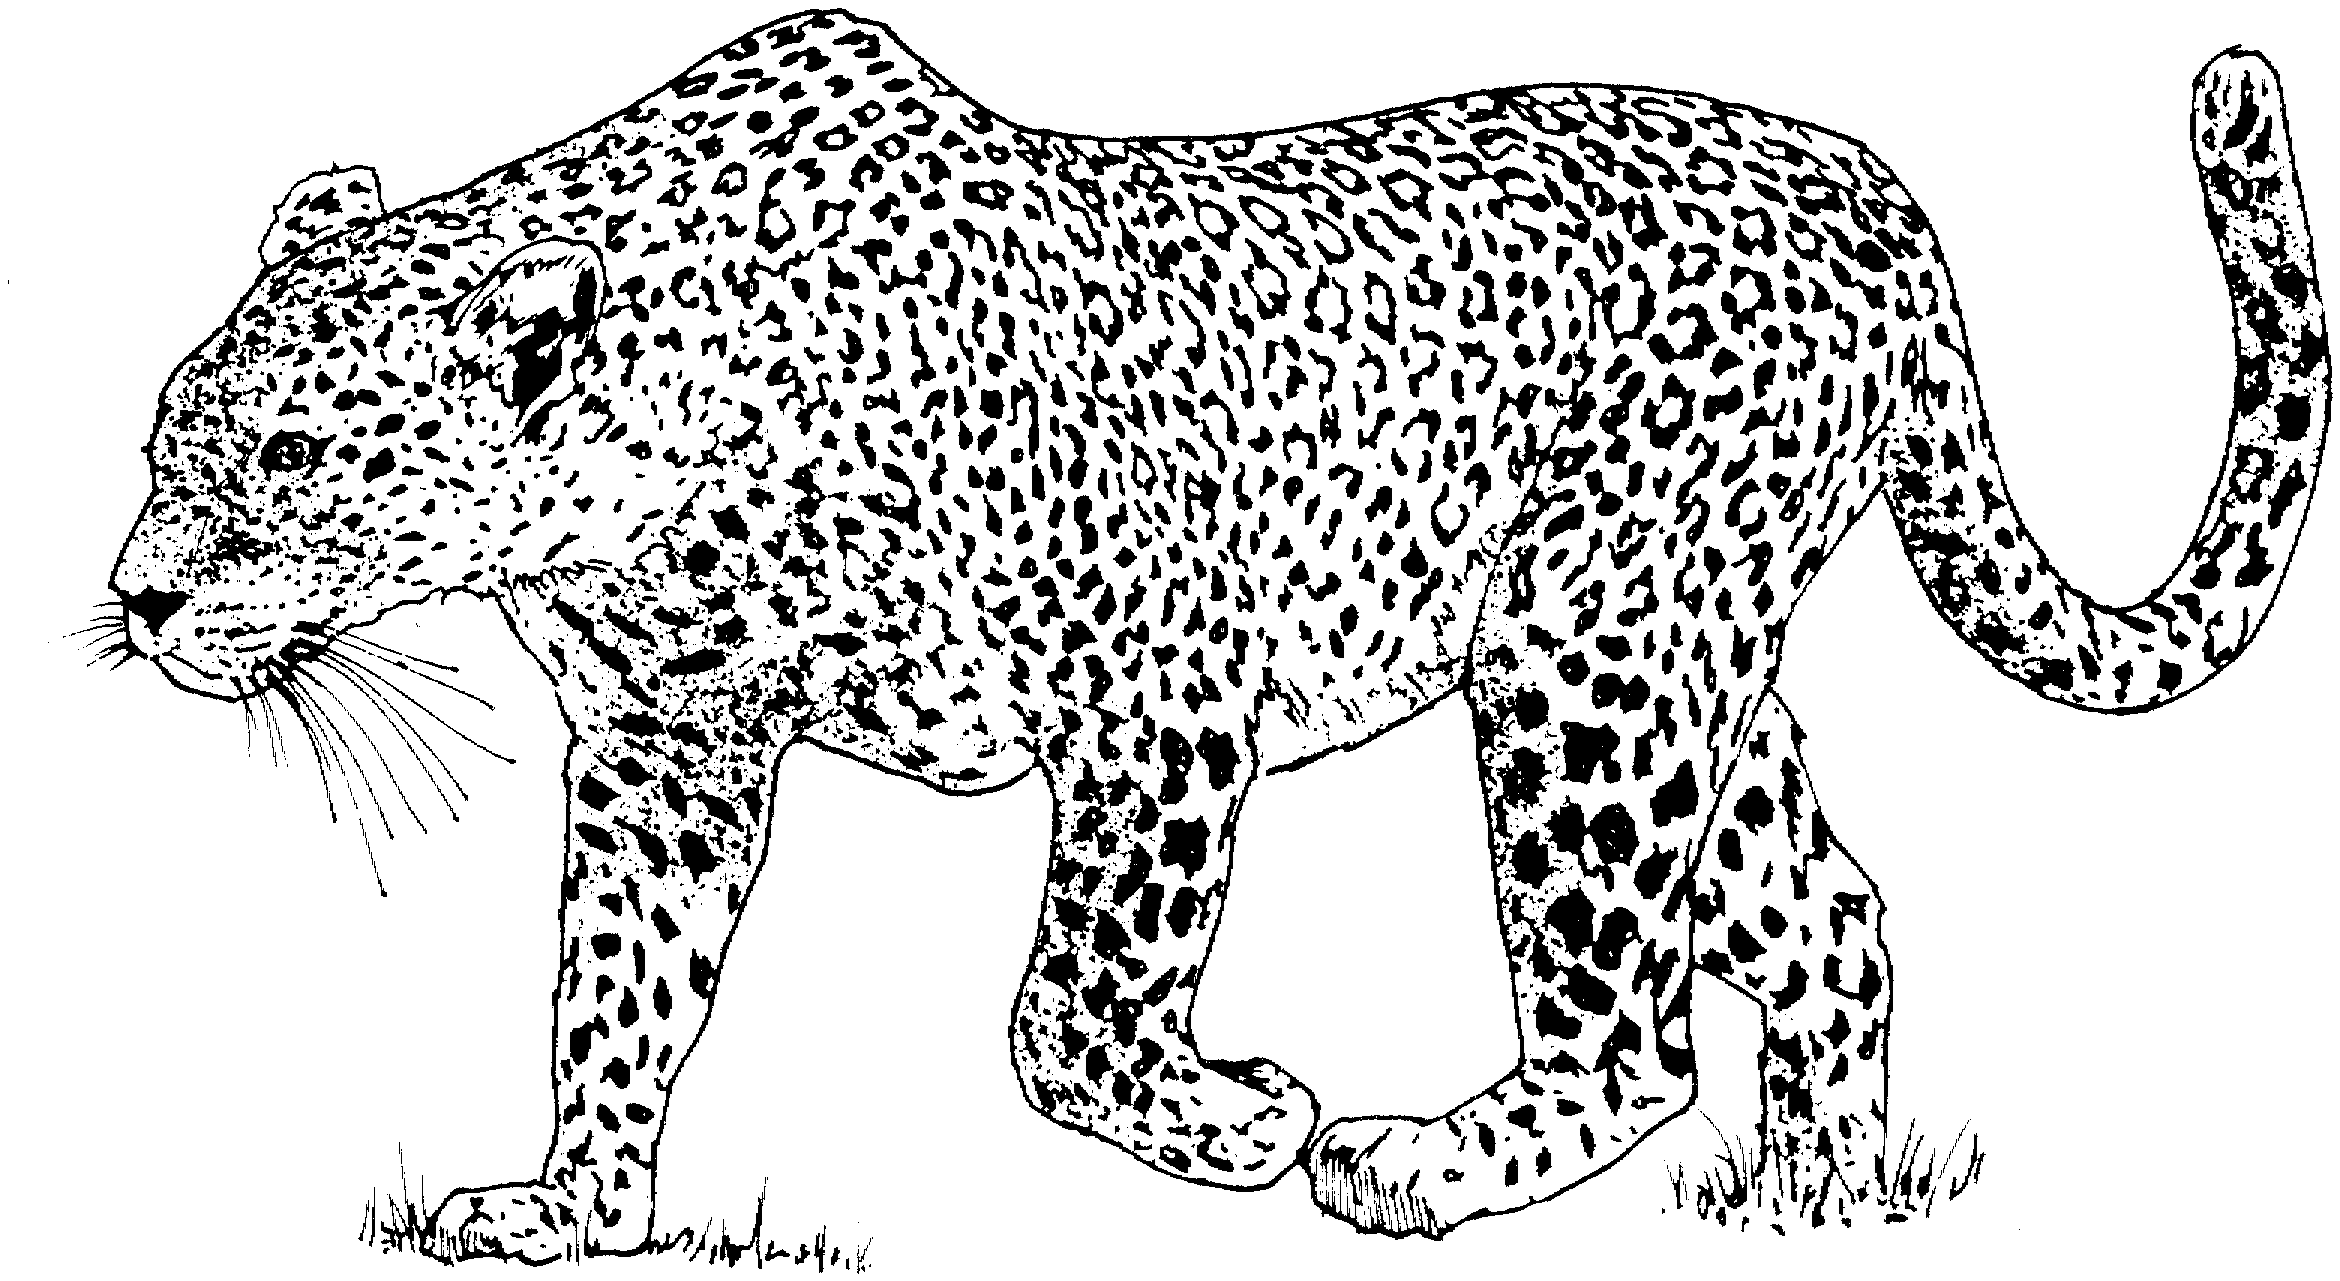 Download This Image Leopard Clipart Black And White. Snowjet.co 